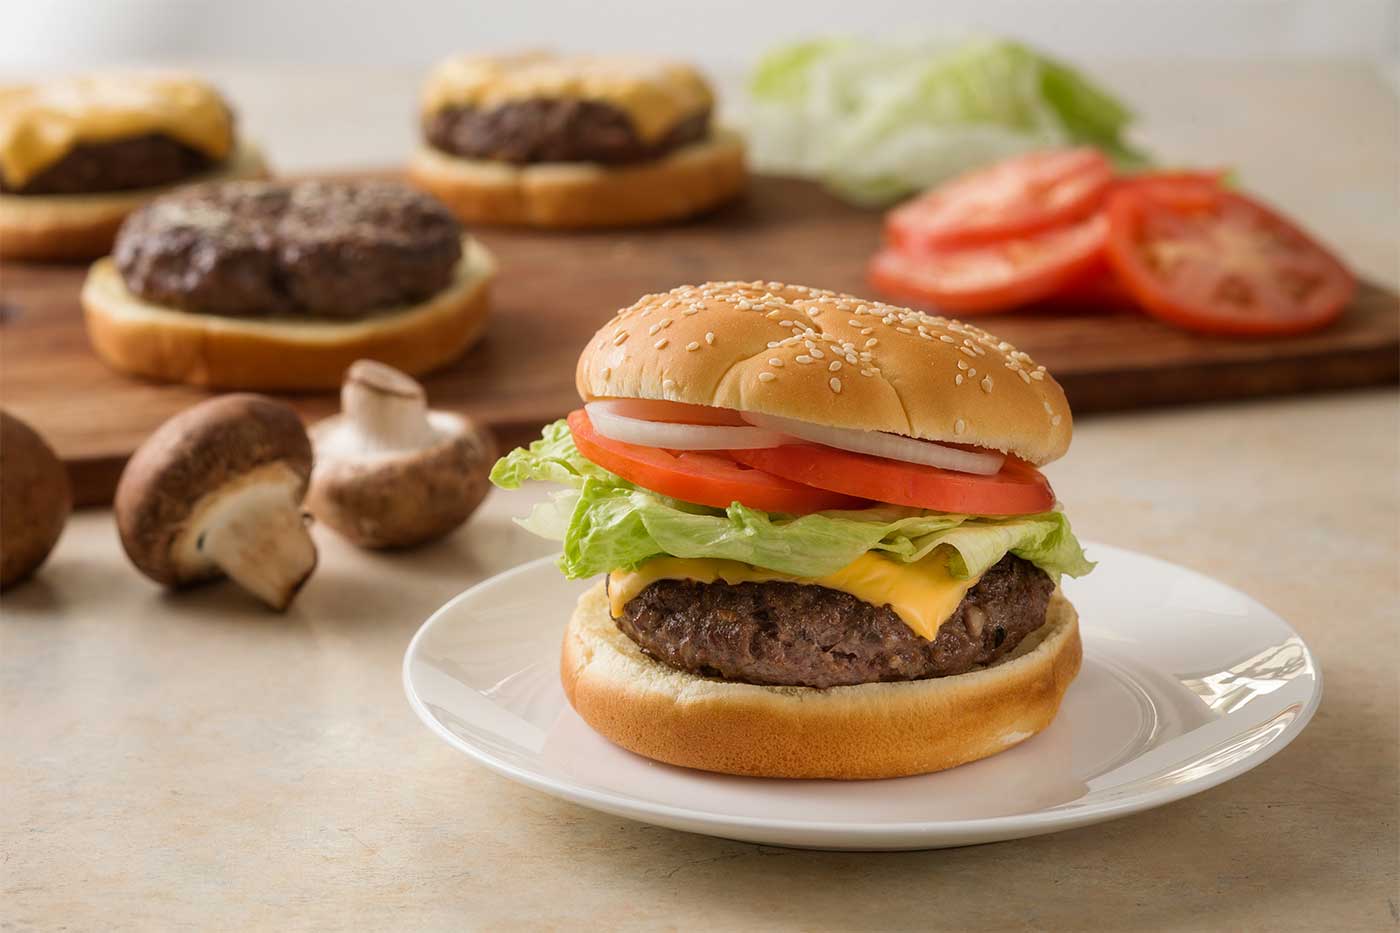 Blended burger topped with cheese, lettuce, tomato and onion on a sesame seed bun.